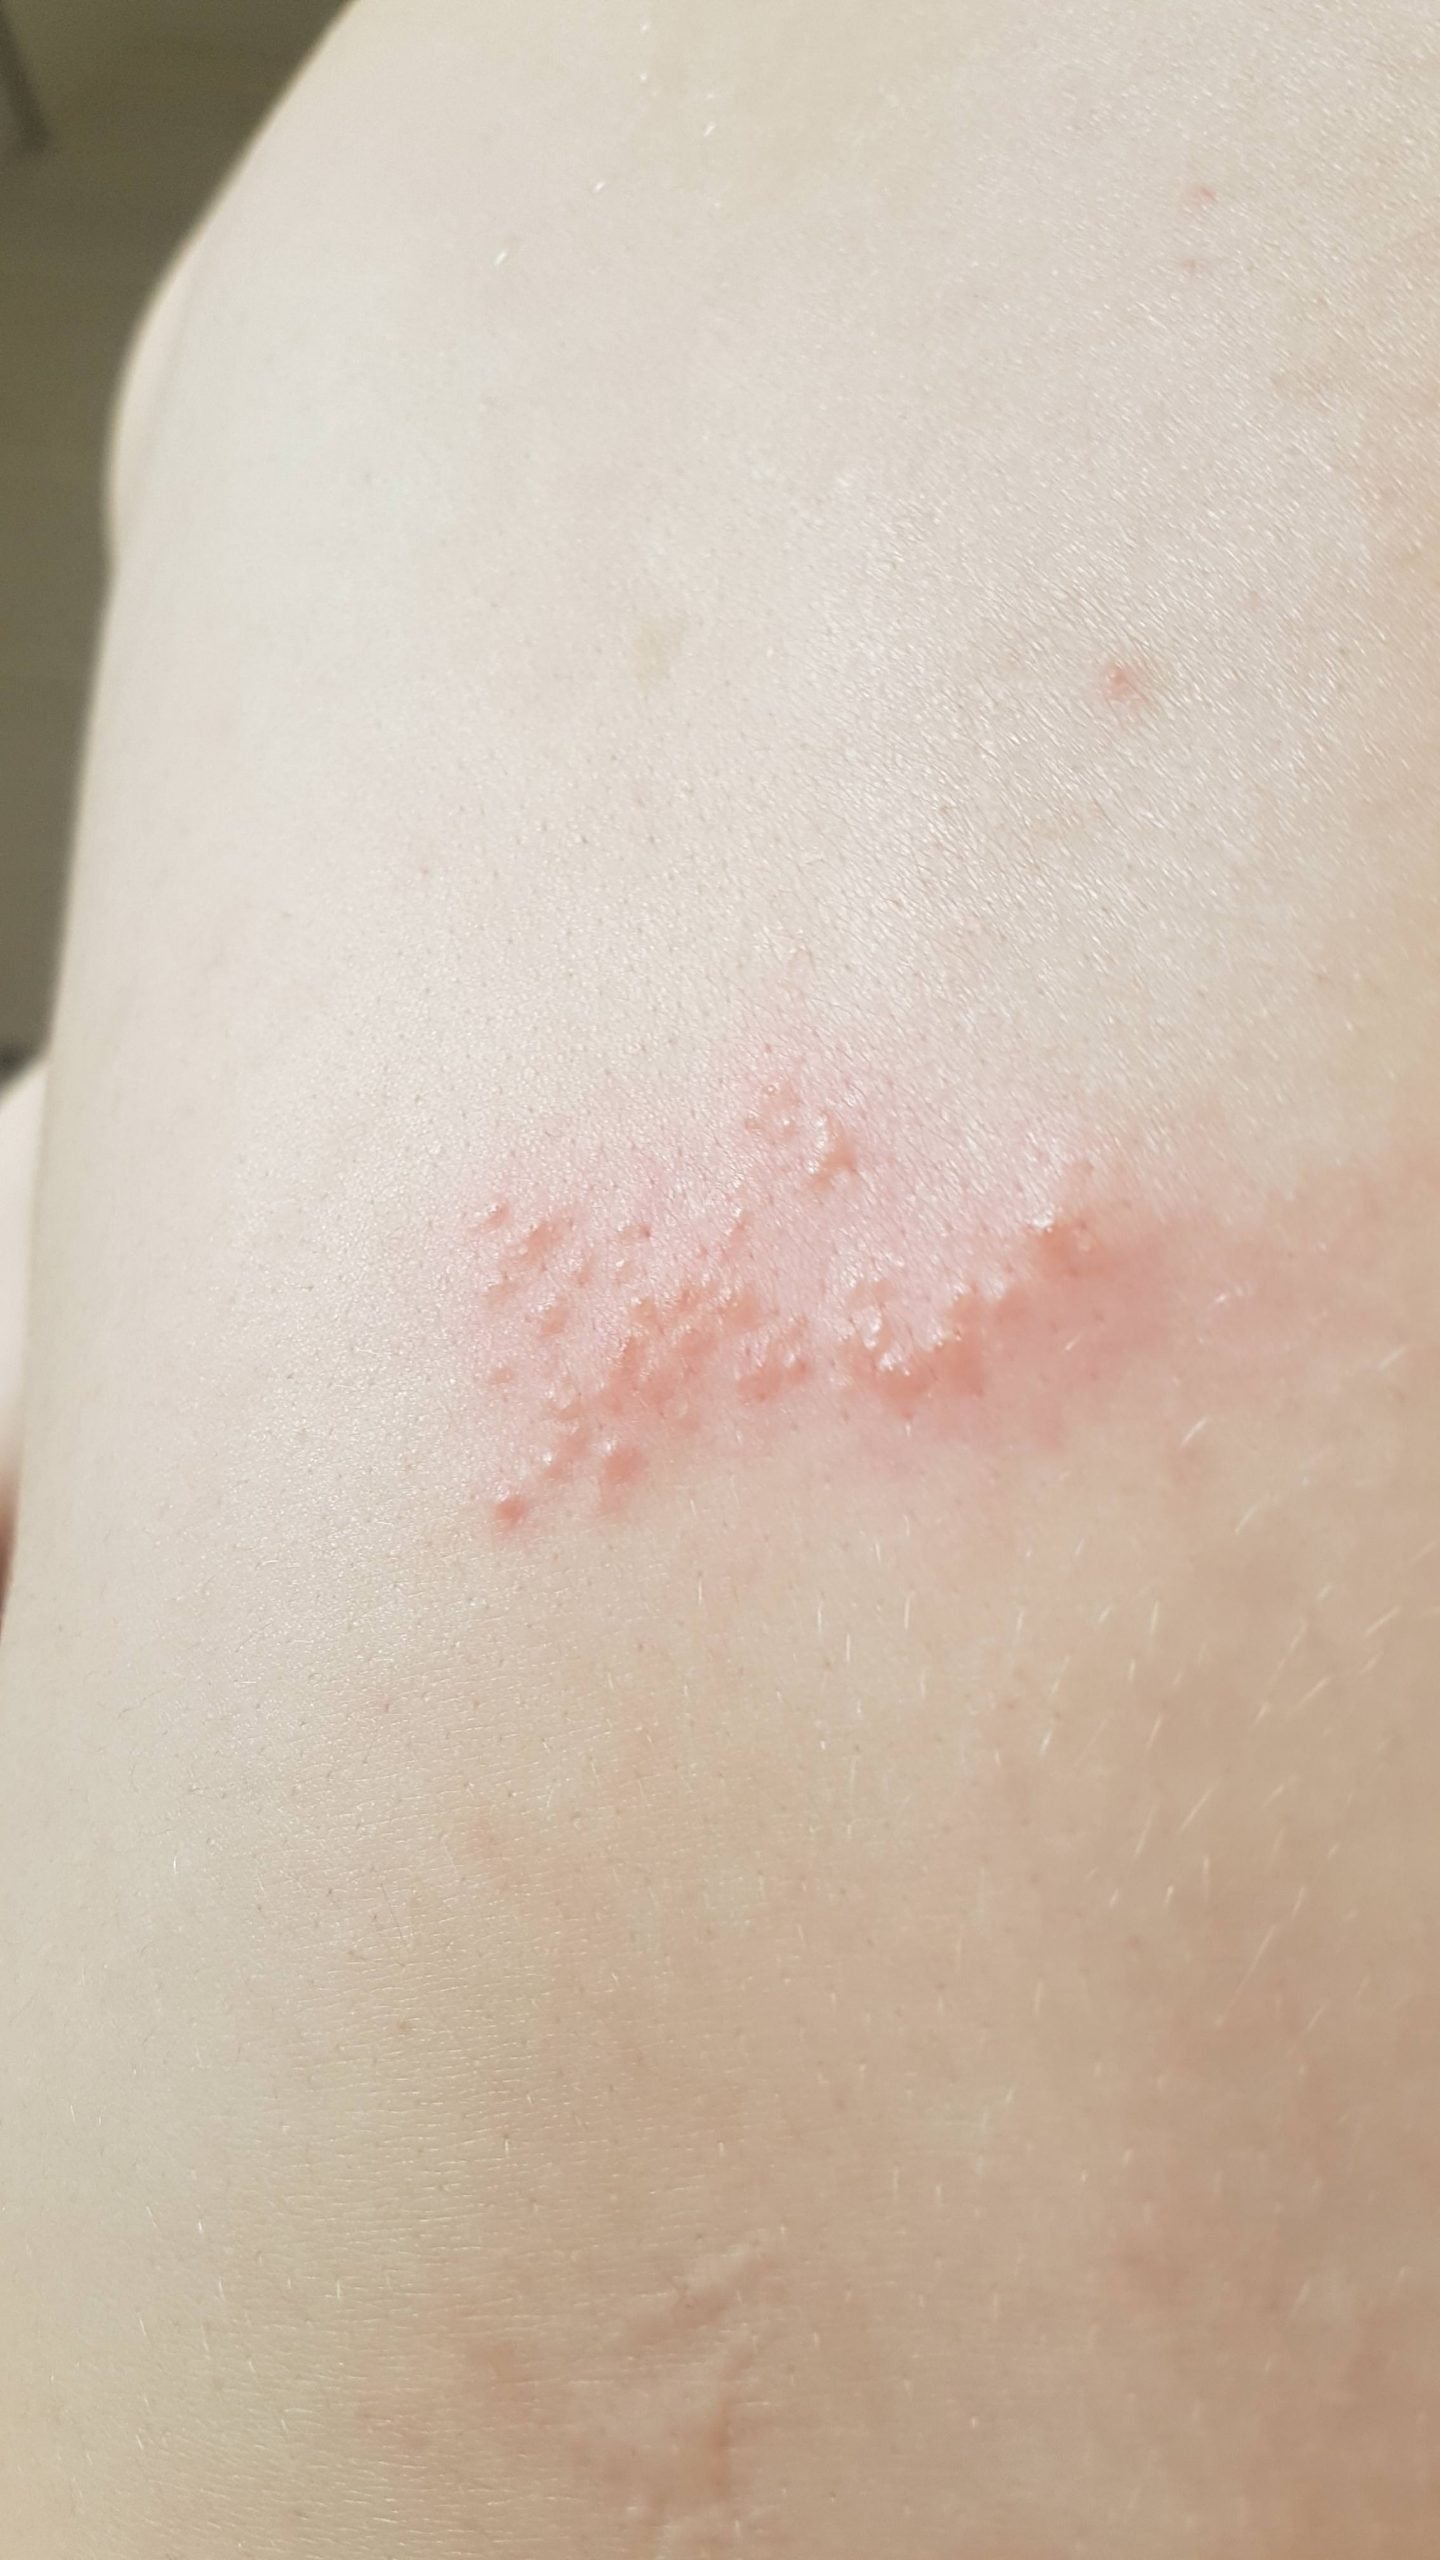 Could this be another Psoriasis breakout or something else? : Psoriasis